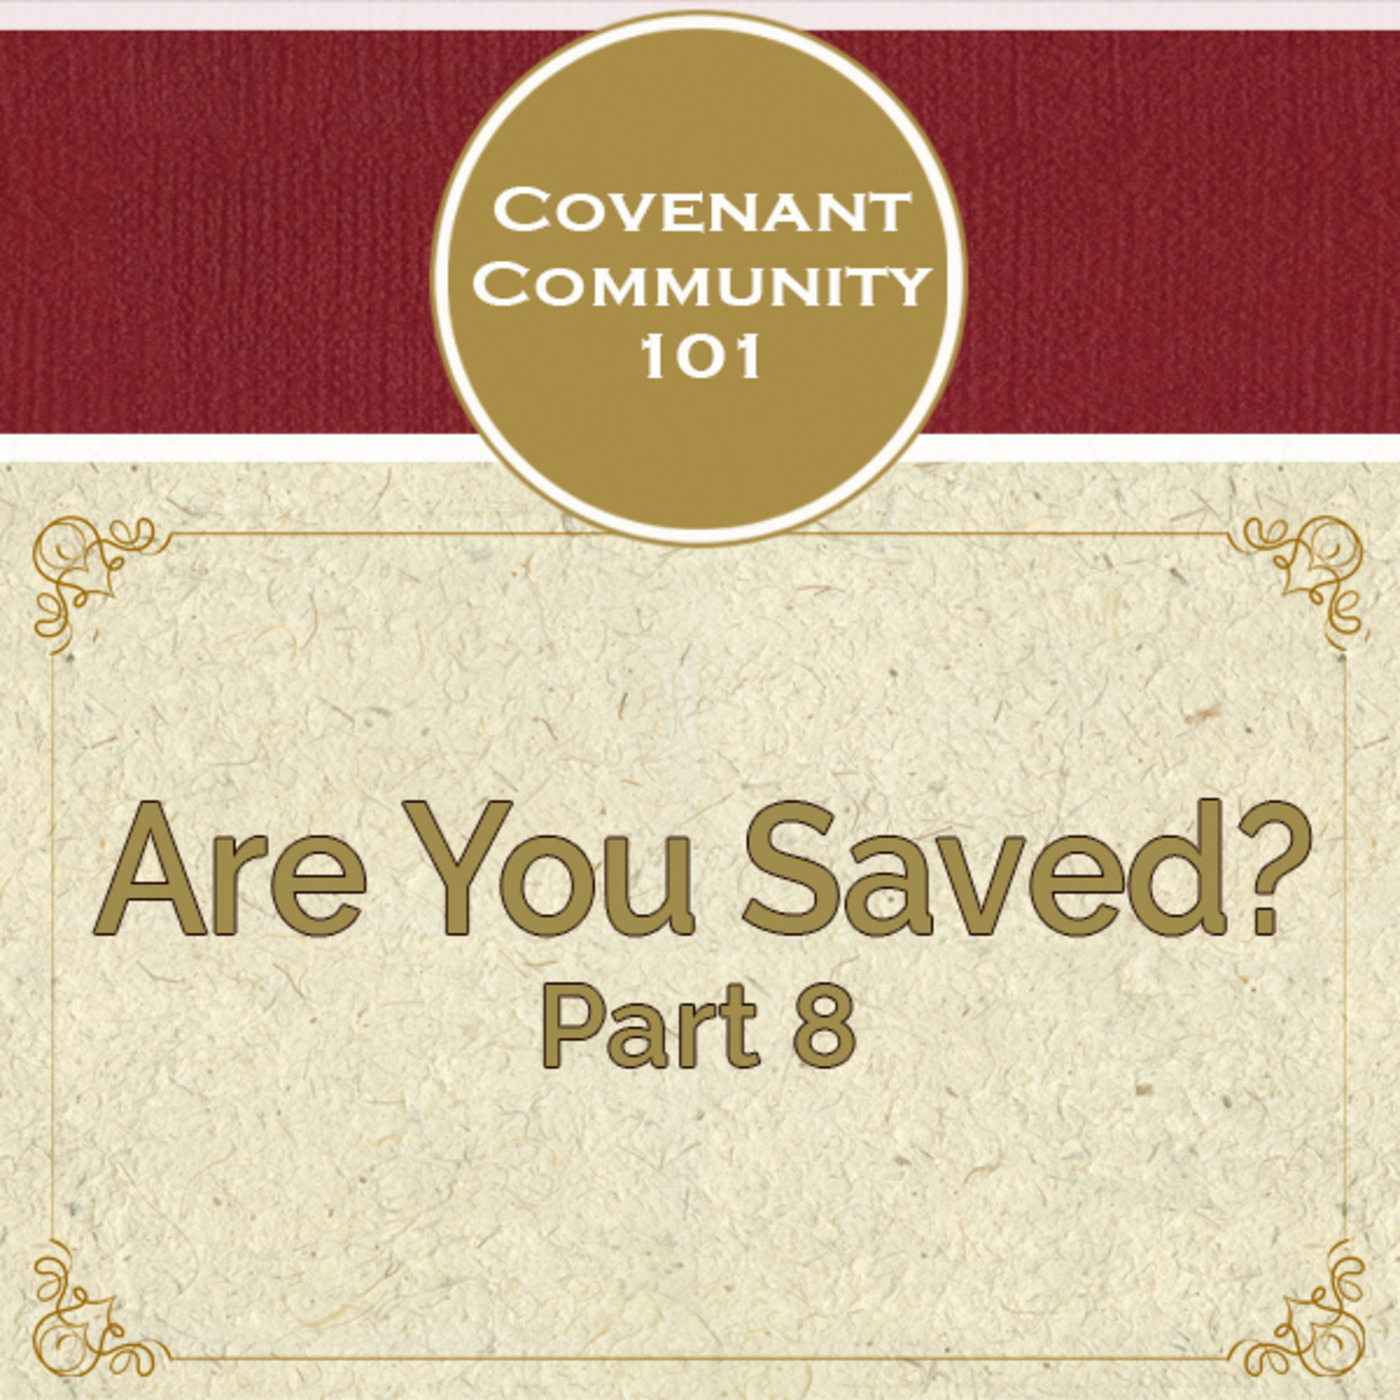 Covenant Community 101: Are You Saved? Part 8